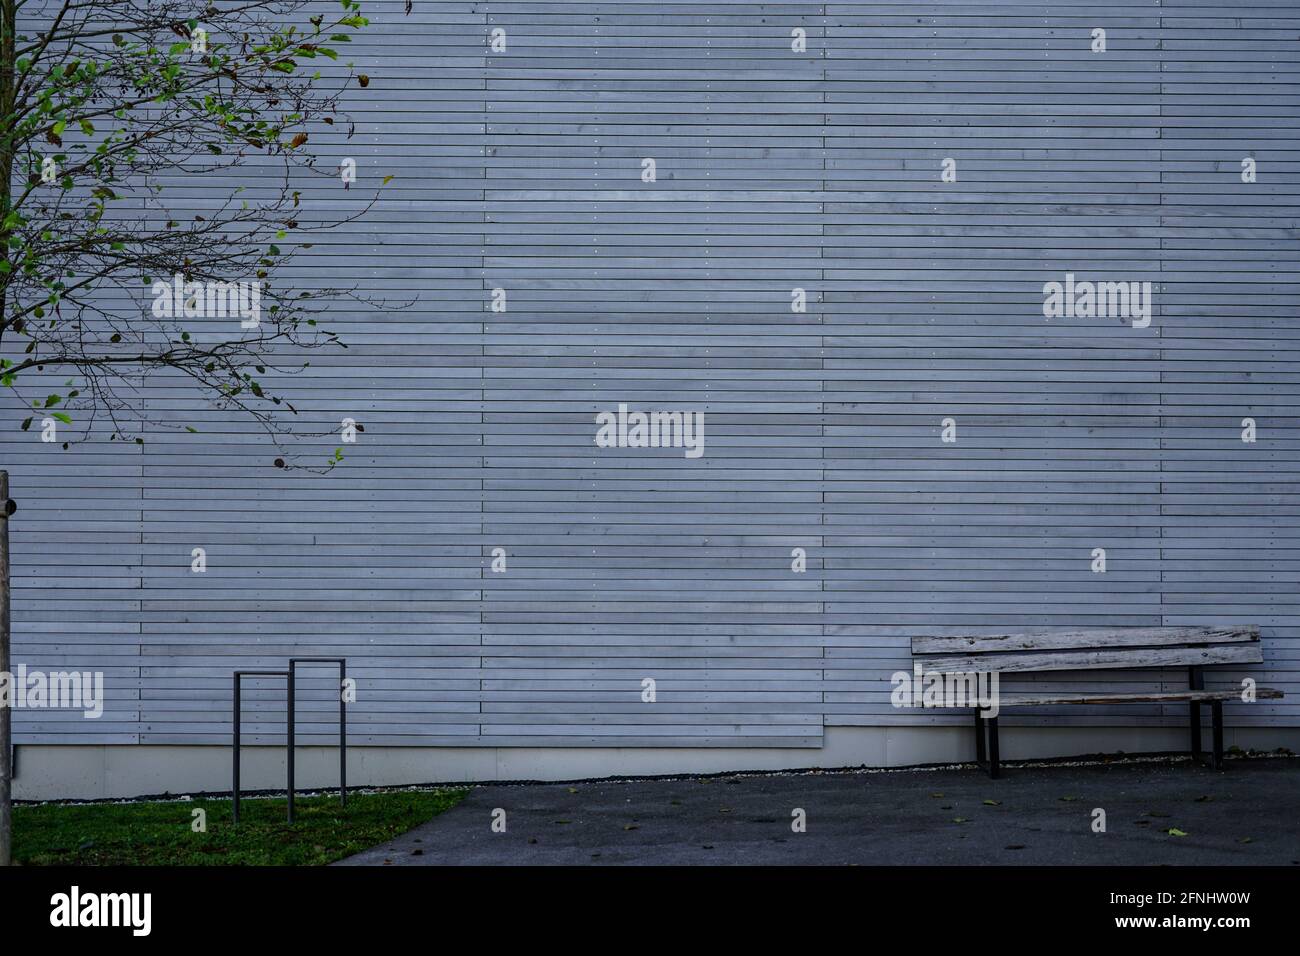 View of a house wall in front of which there is a wooden bench and a bicycle stand. Stock Photo